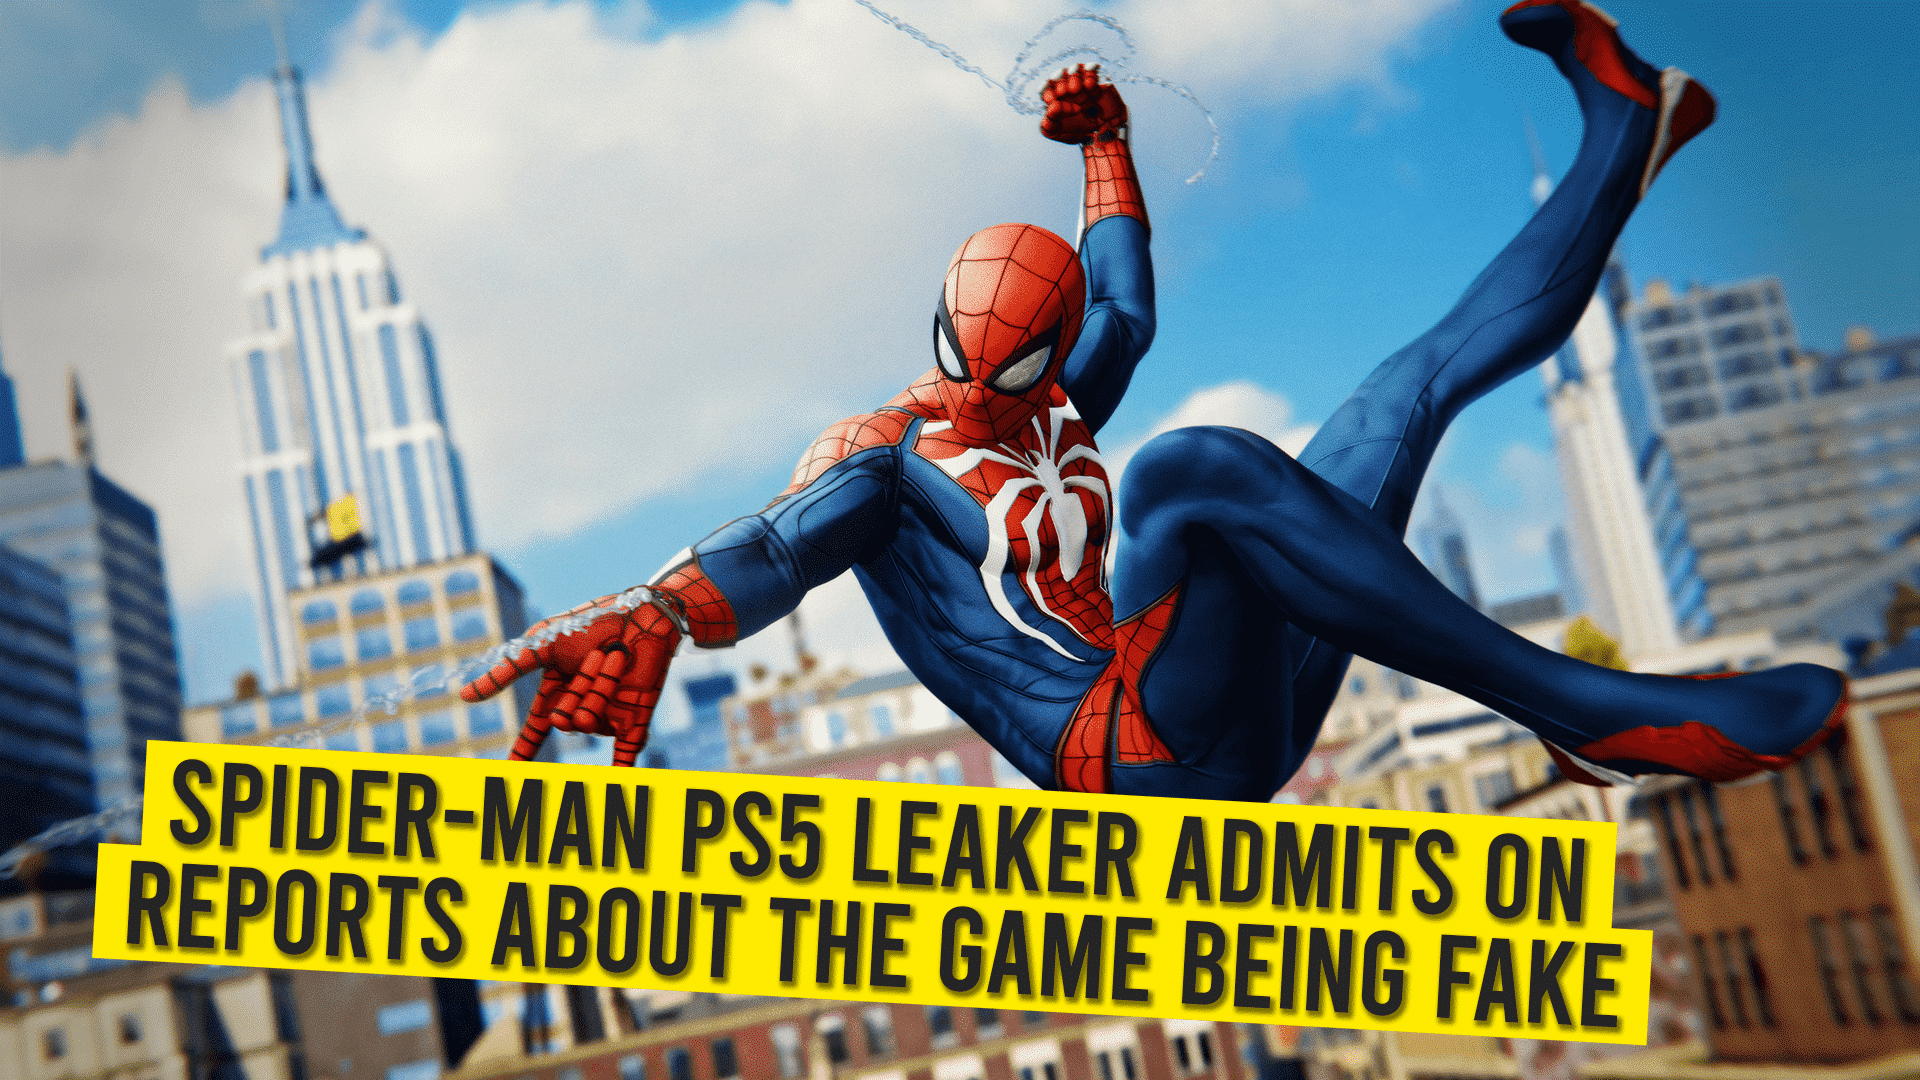 Spider-Man PS5 Leaker Admits On Reports About The Game Being Fake